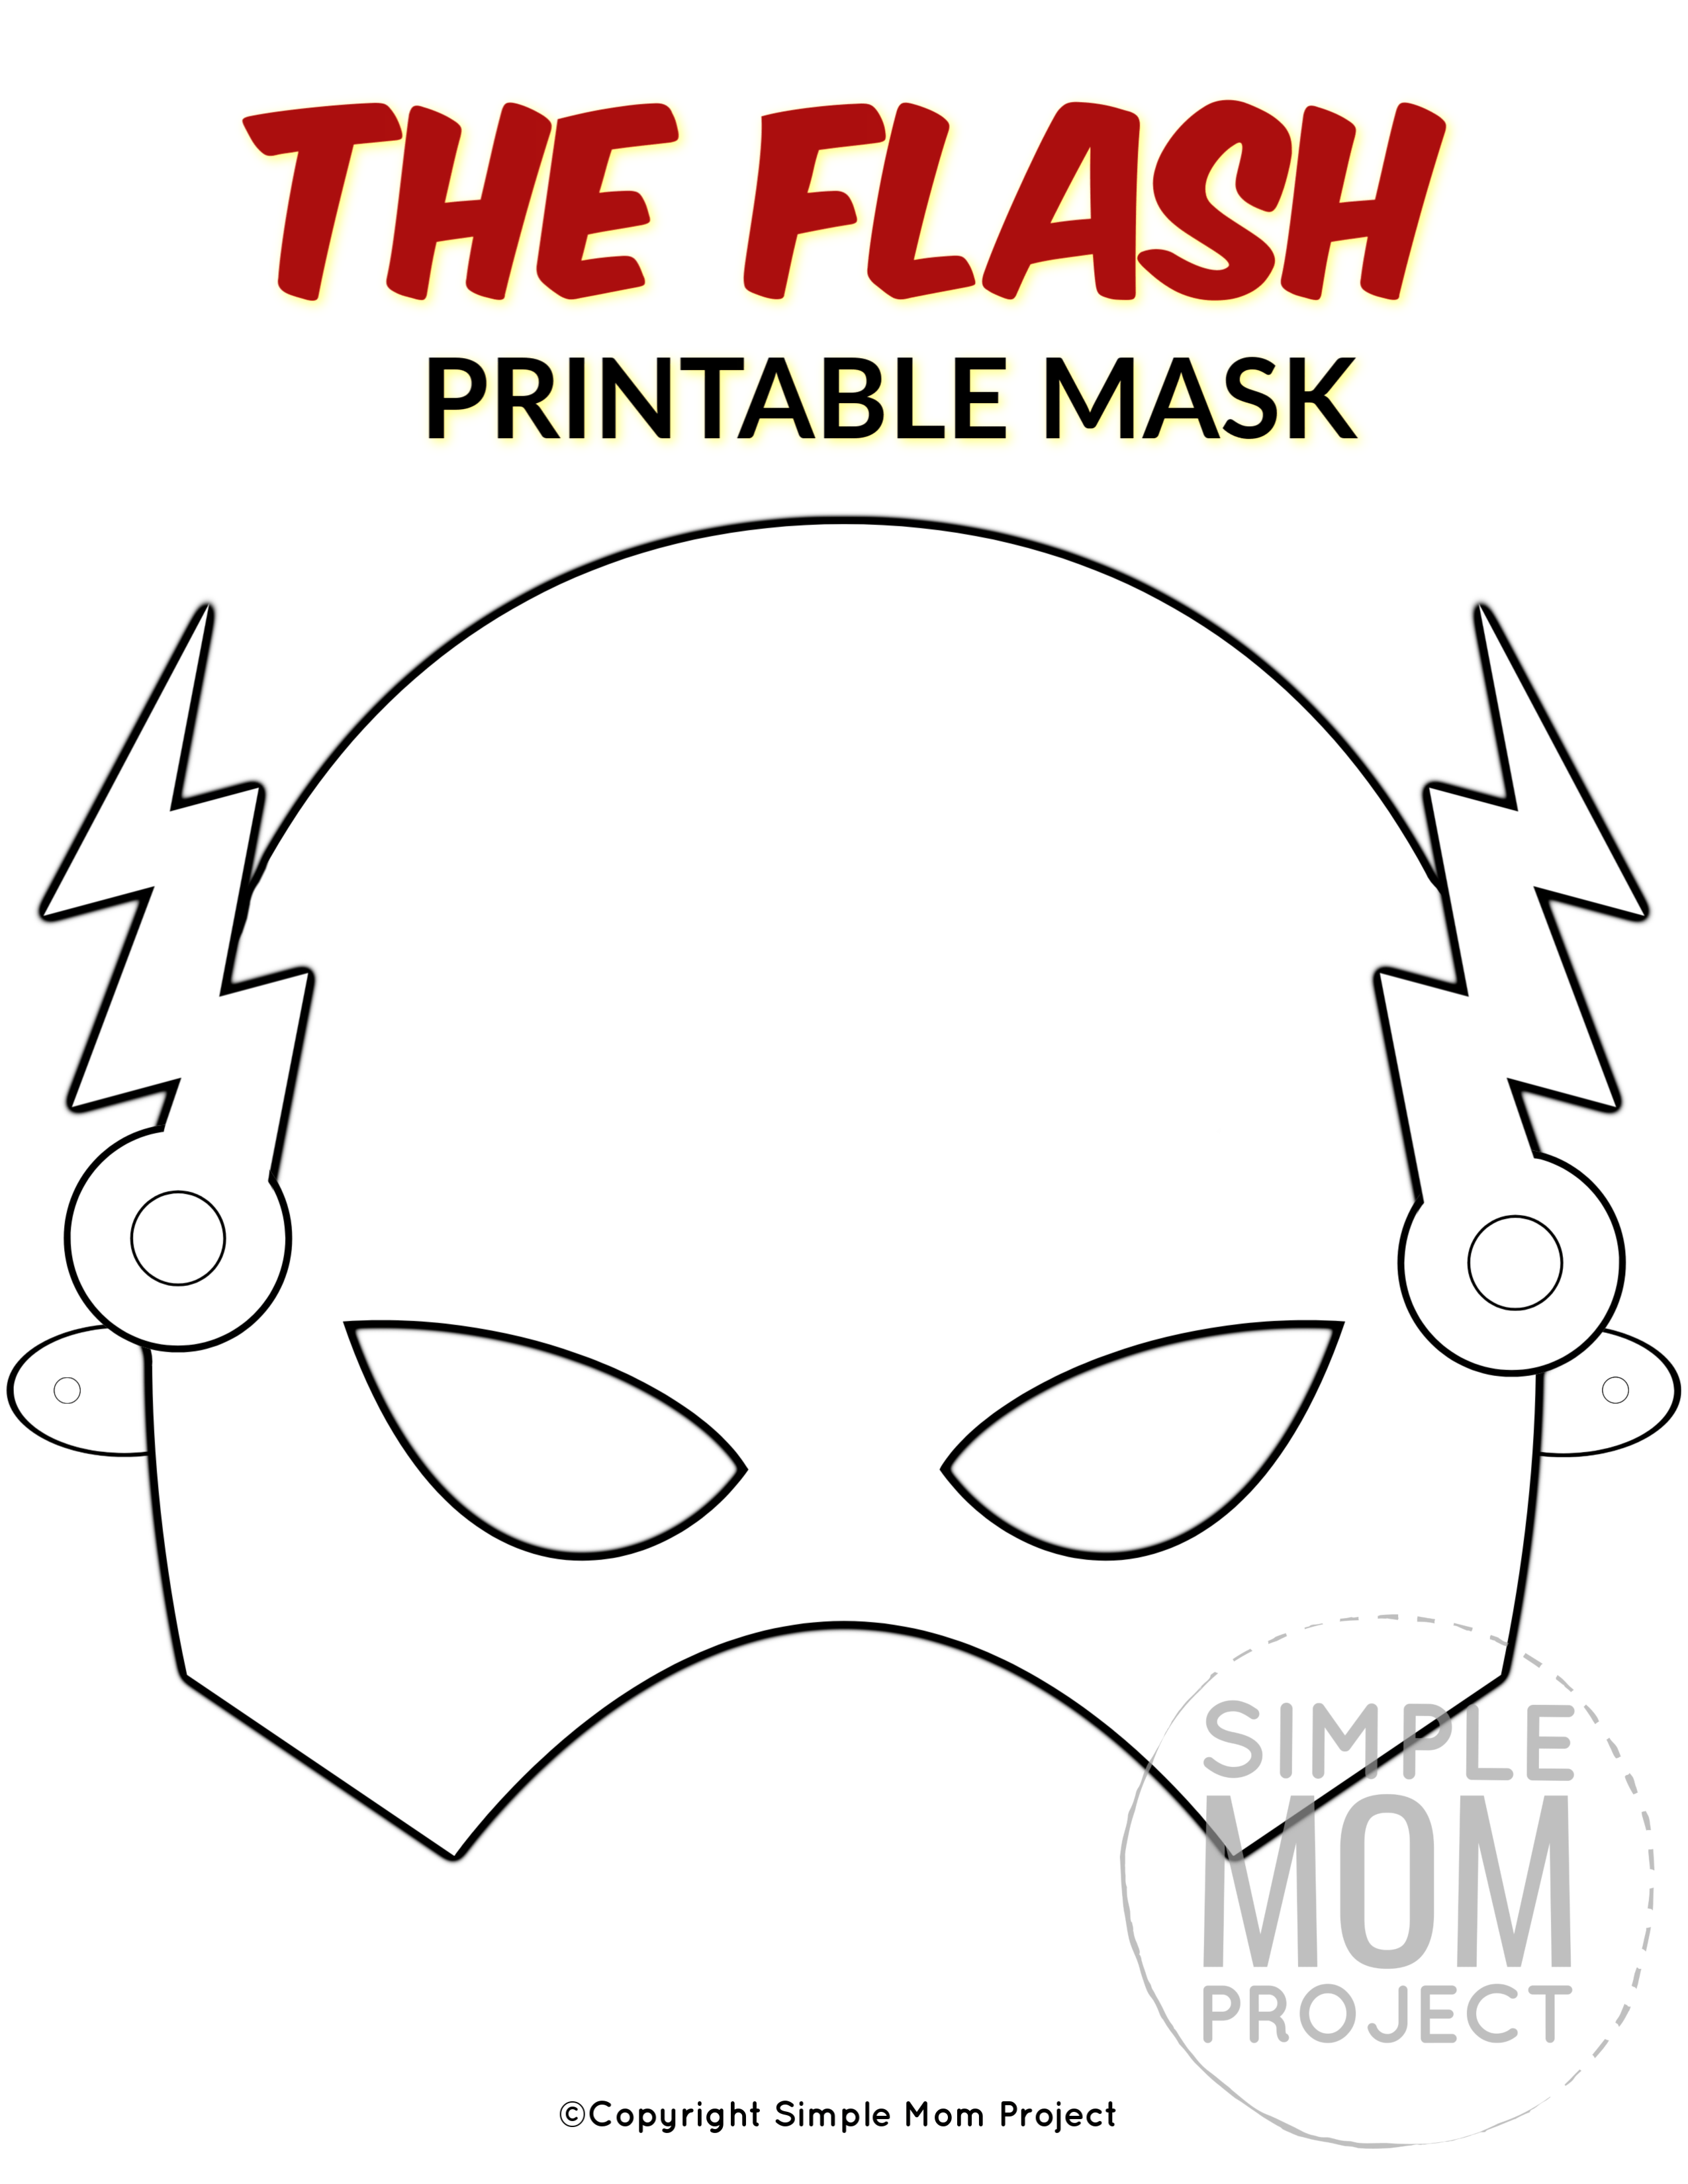 The Flash Free Printable Mask Template Face Masks For Kids Mask For Kids Mask Template Printable